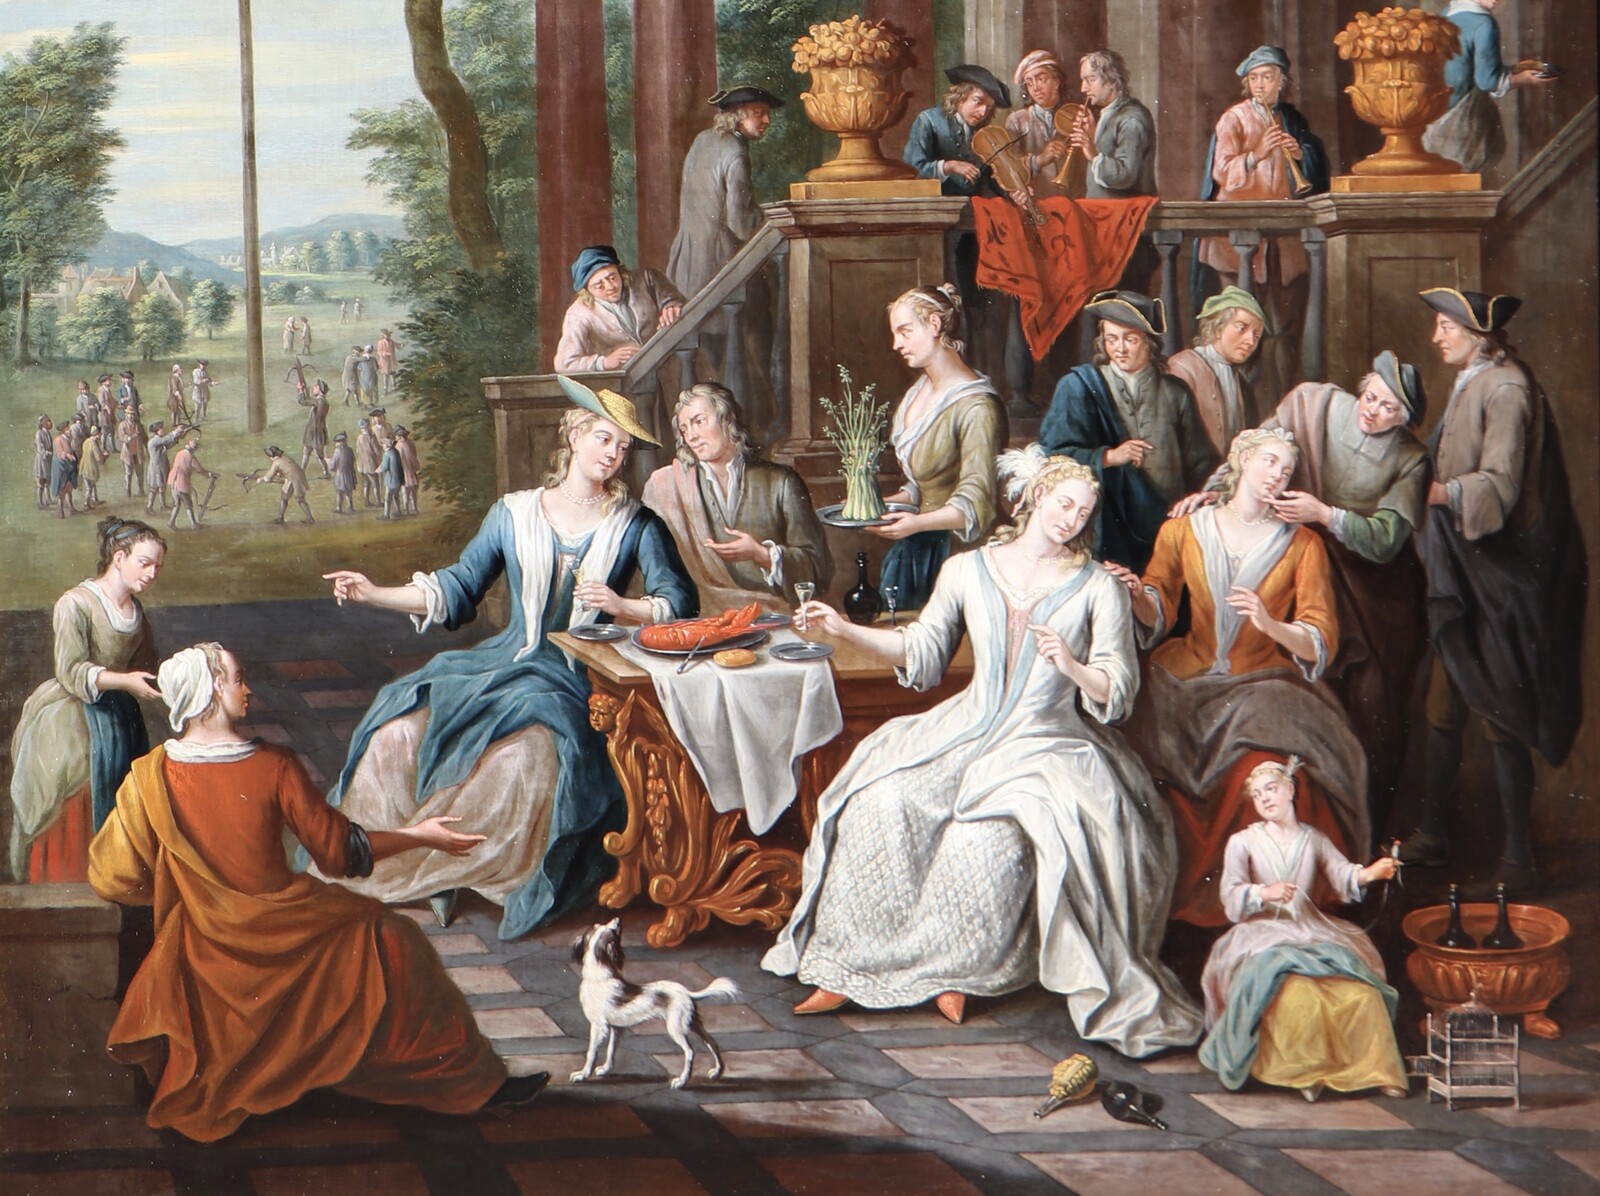 A fancy social gathering during a crossbow competition